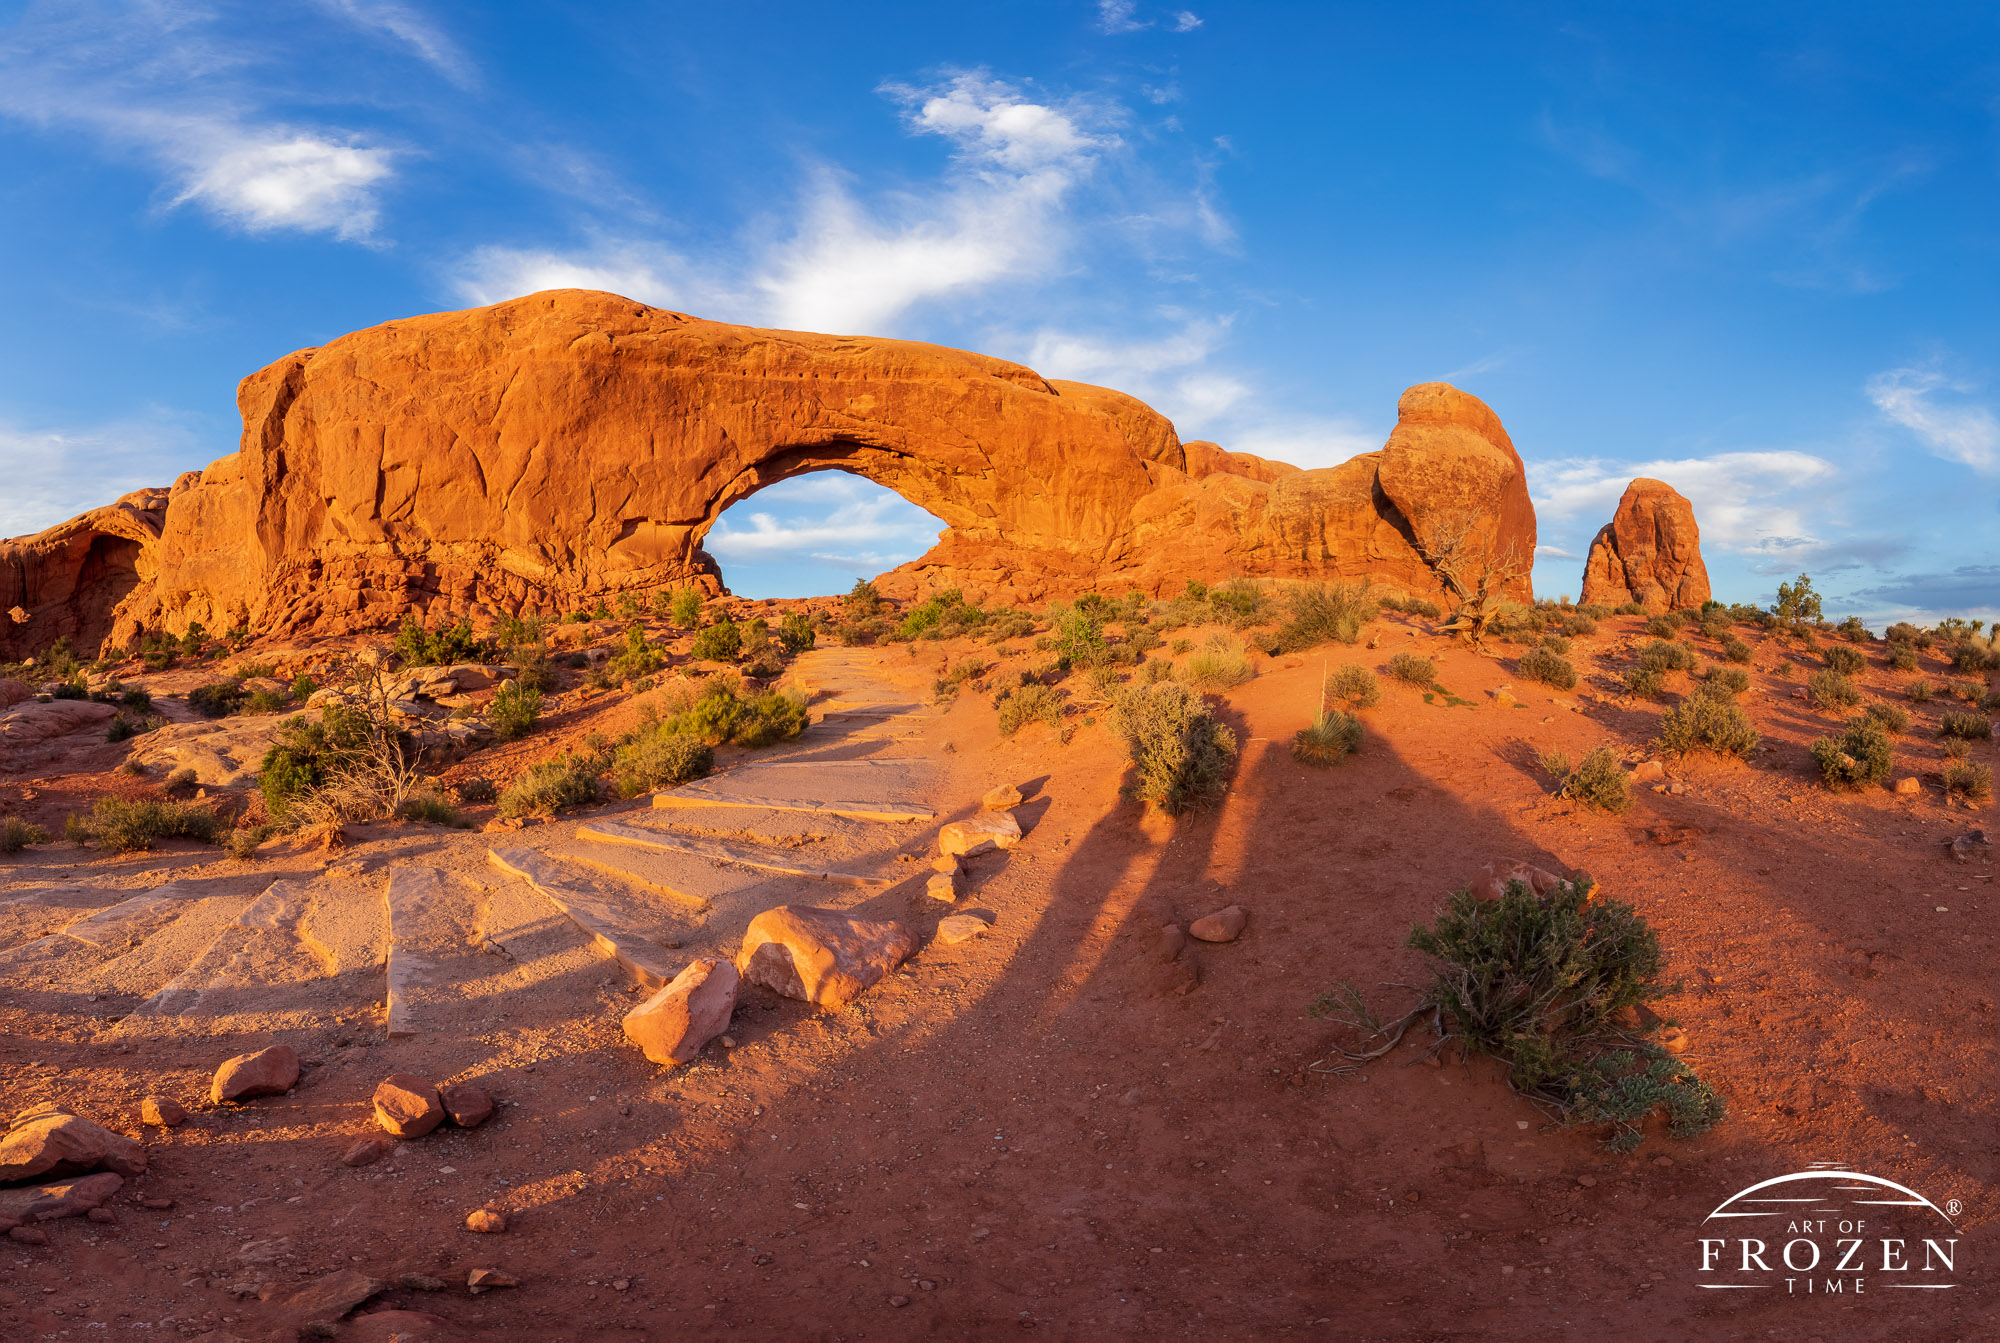 Sunset over Turret Arch and Double Arch, Arches National Park, where the low-angled sunlight rakes over the red sandstone